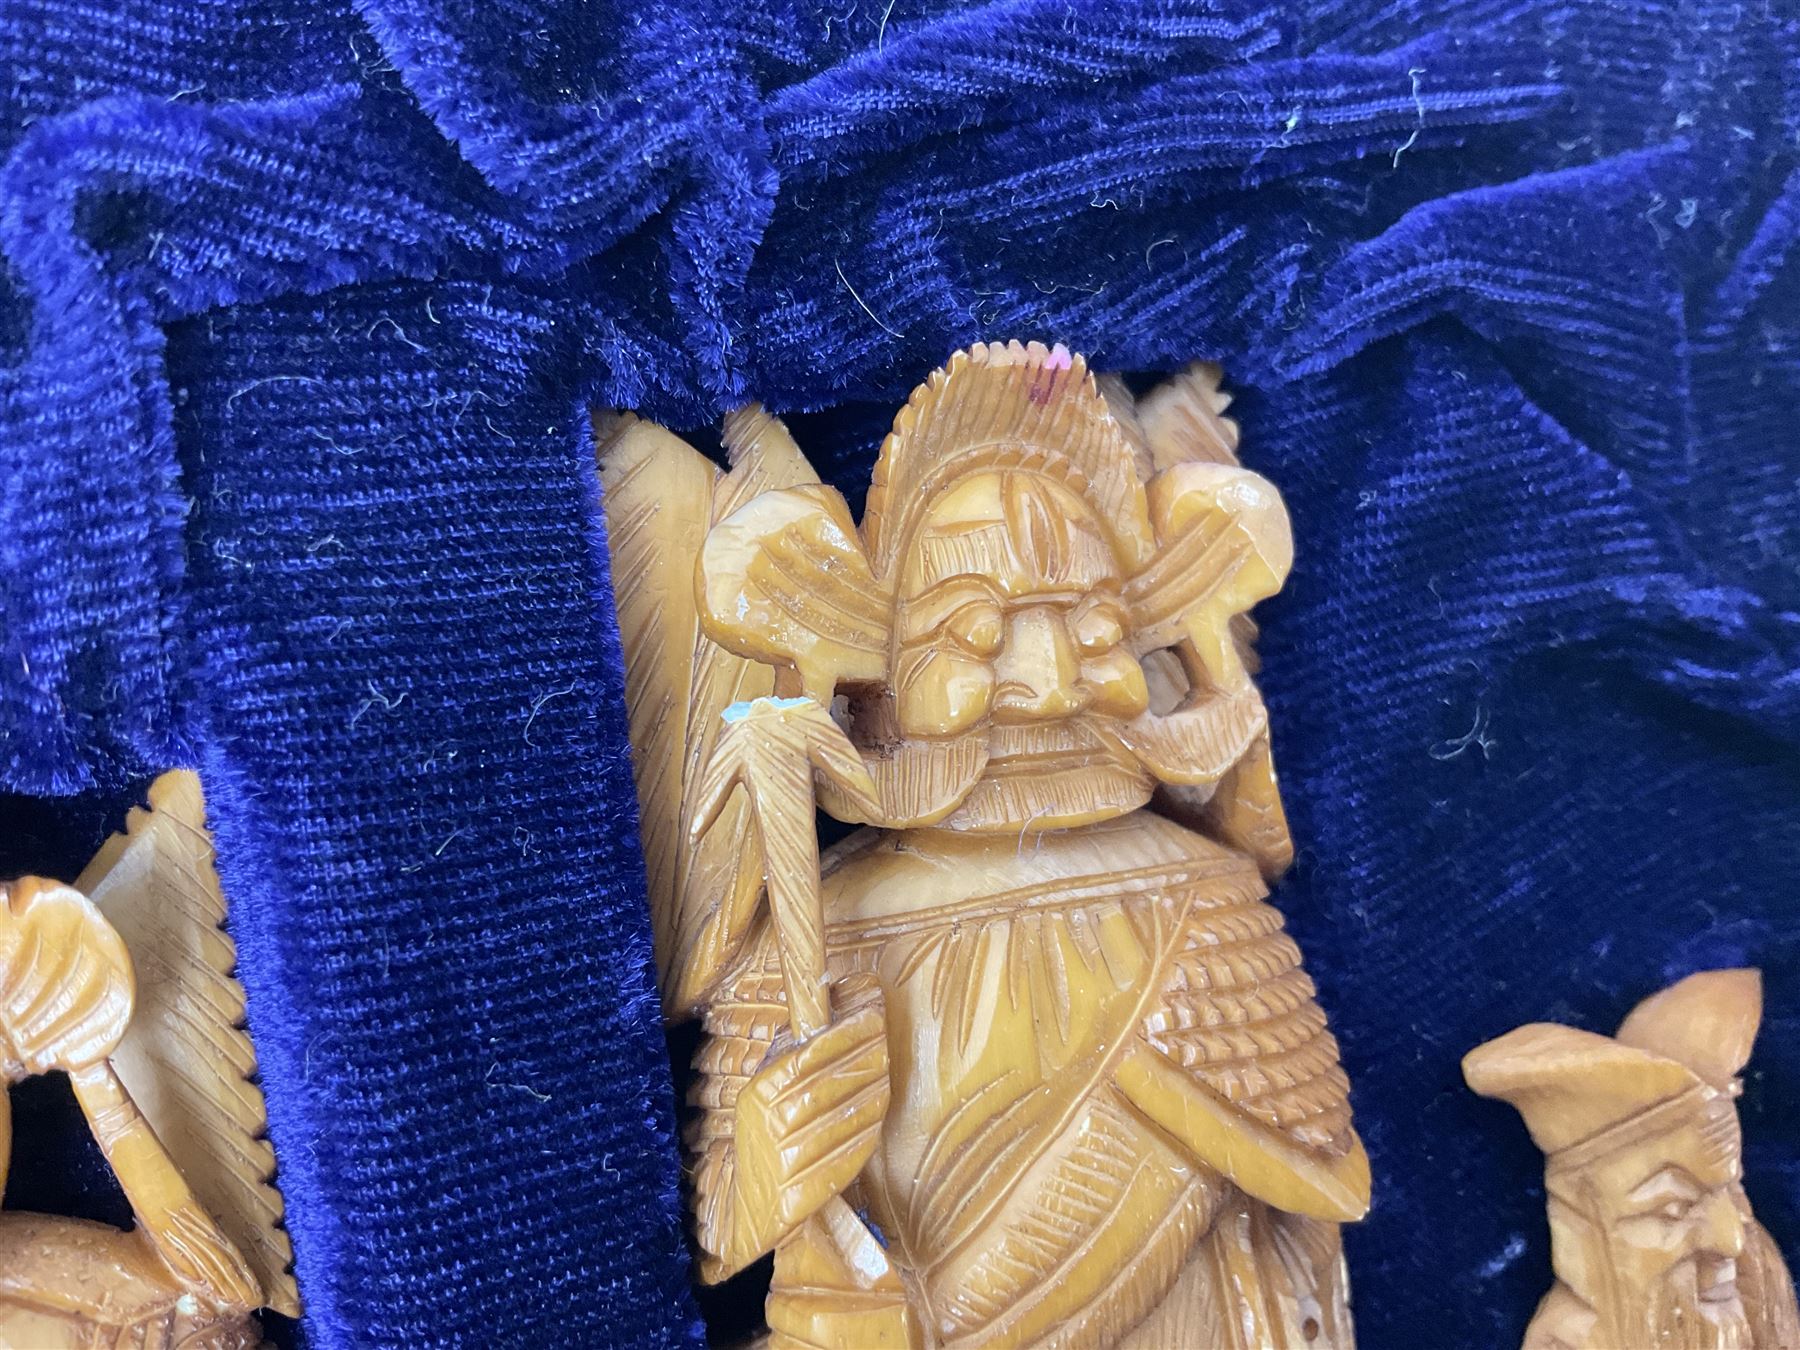 Chinese resin chess set - Image 3 of 7